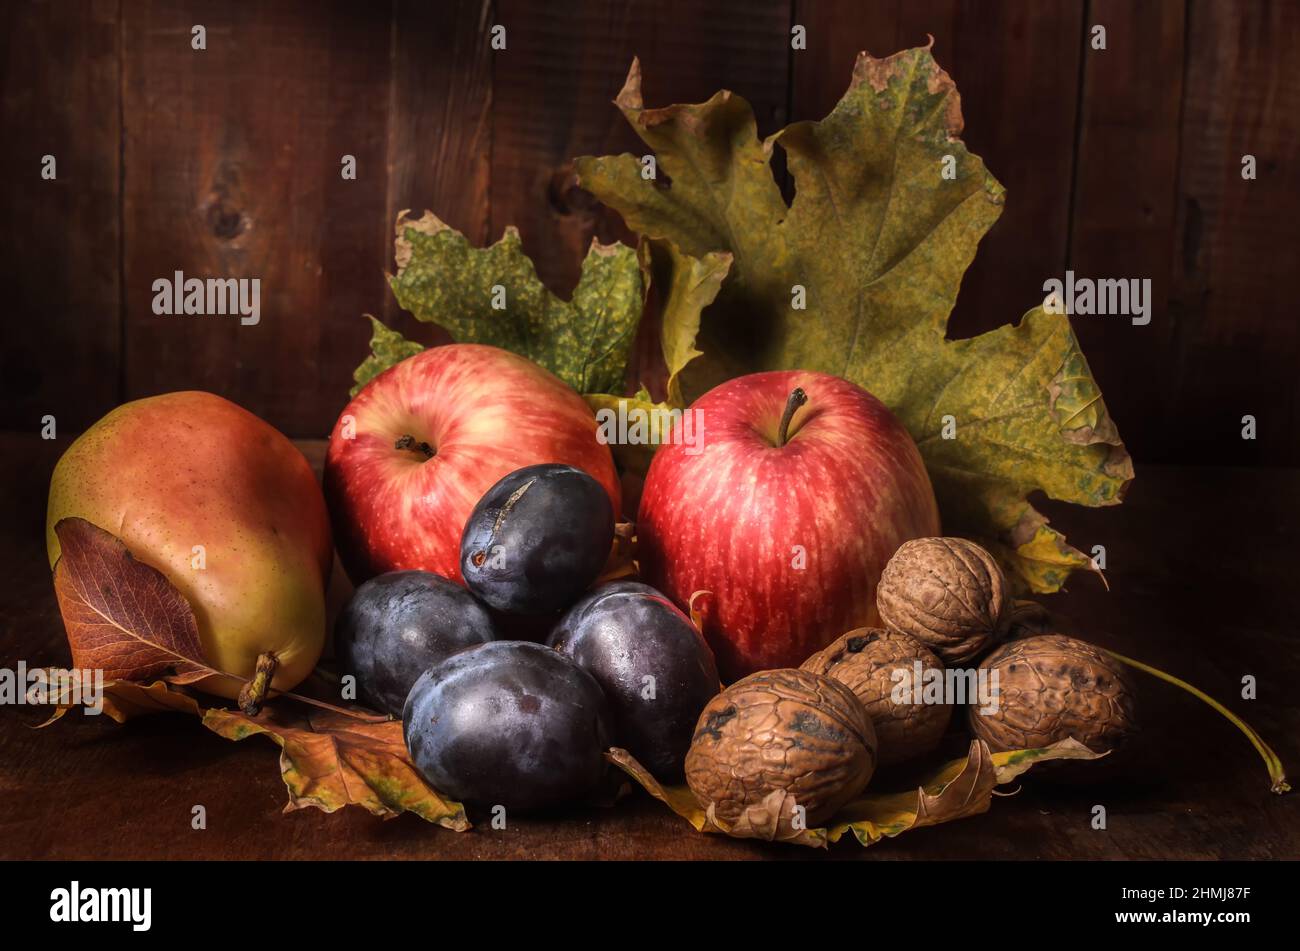 fruits in bulk on a dark wooden background in a rustic style Stock Photo